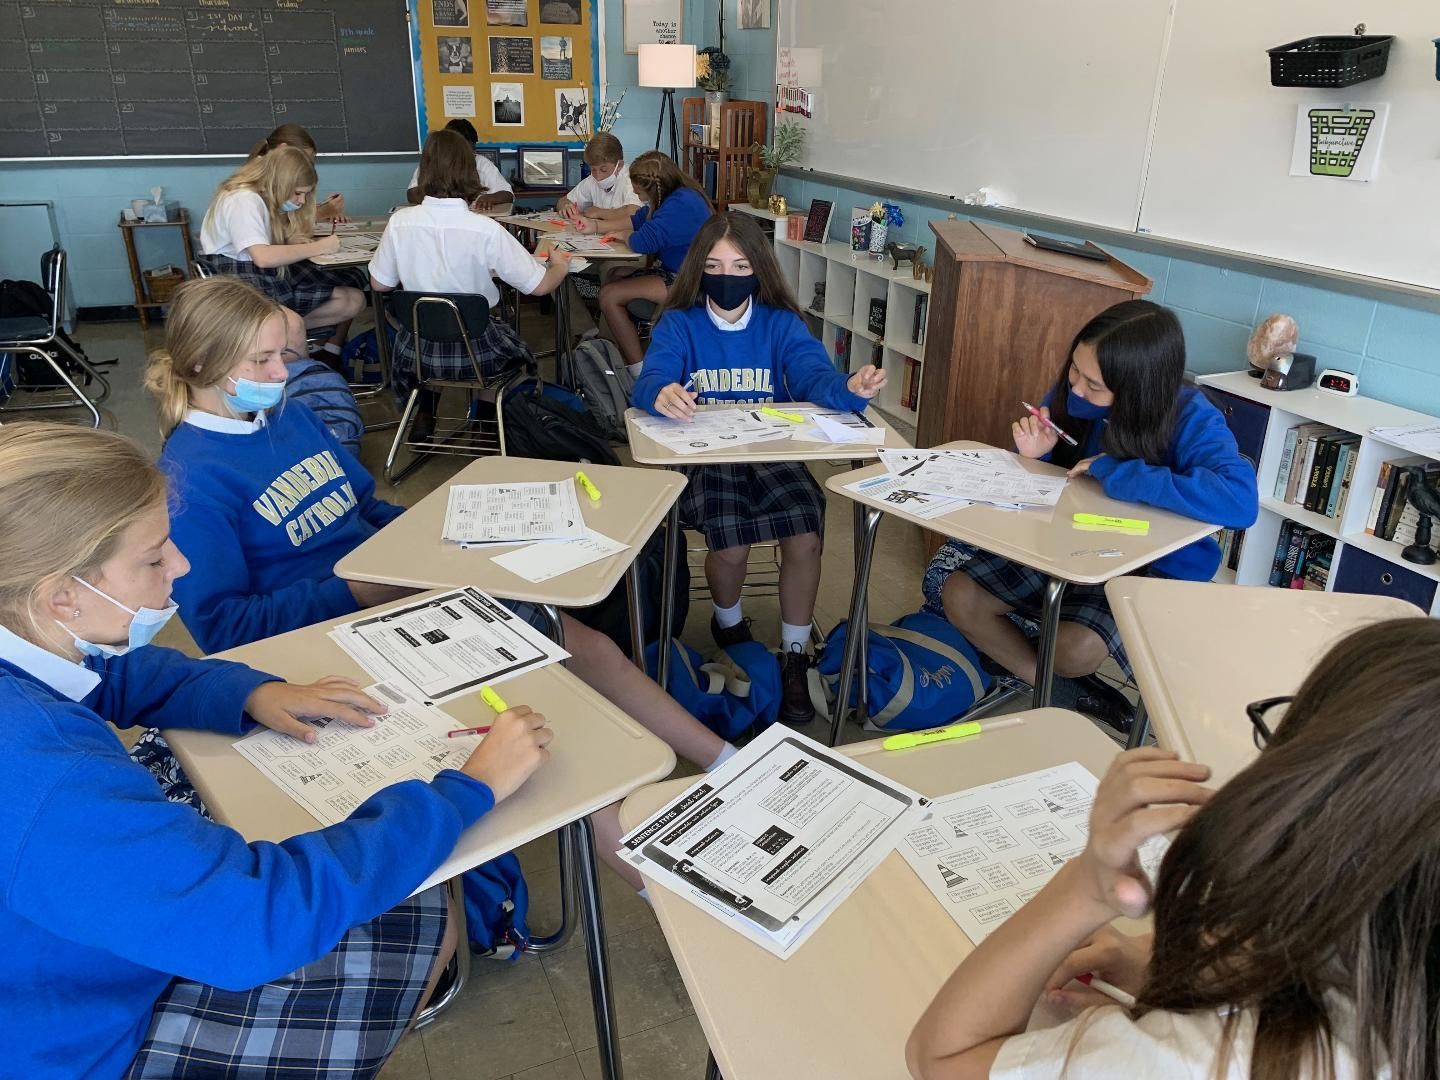 A group of children wearing masks are sitting at desks in a classroom.